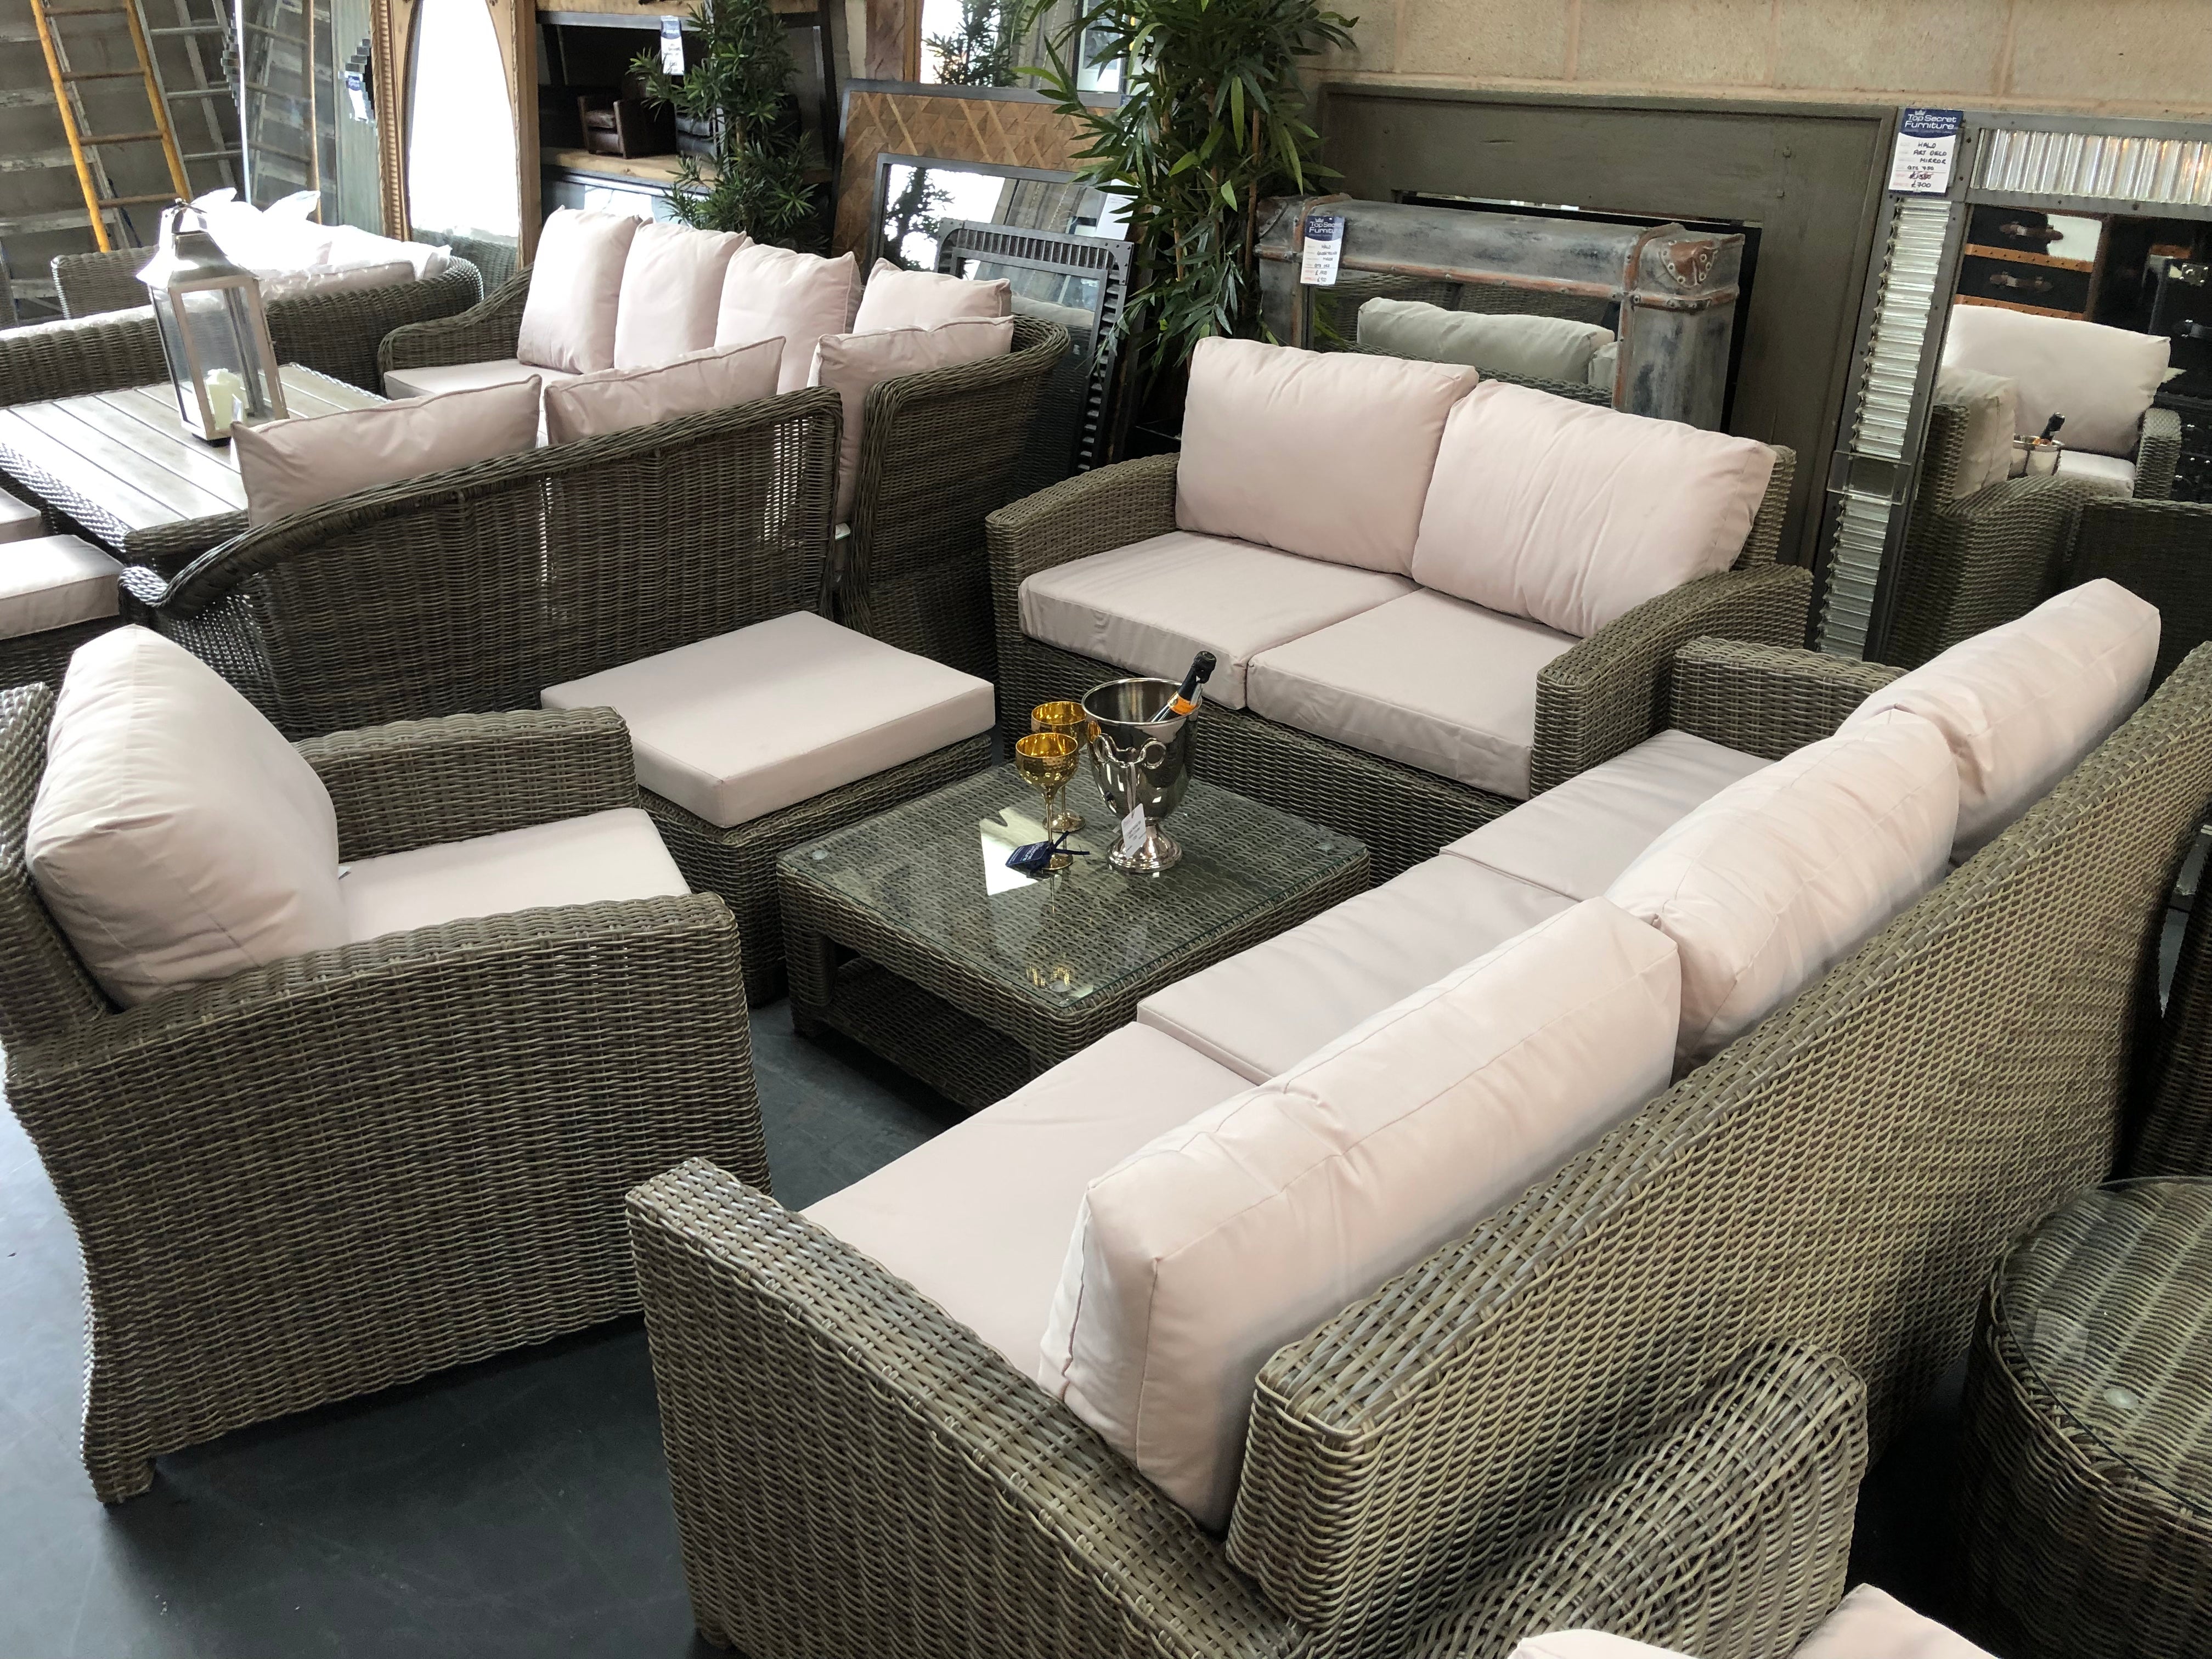 Rattan all weather Garden Furniture for outdoor use or can be used for indoor Conservatory furniture